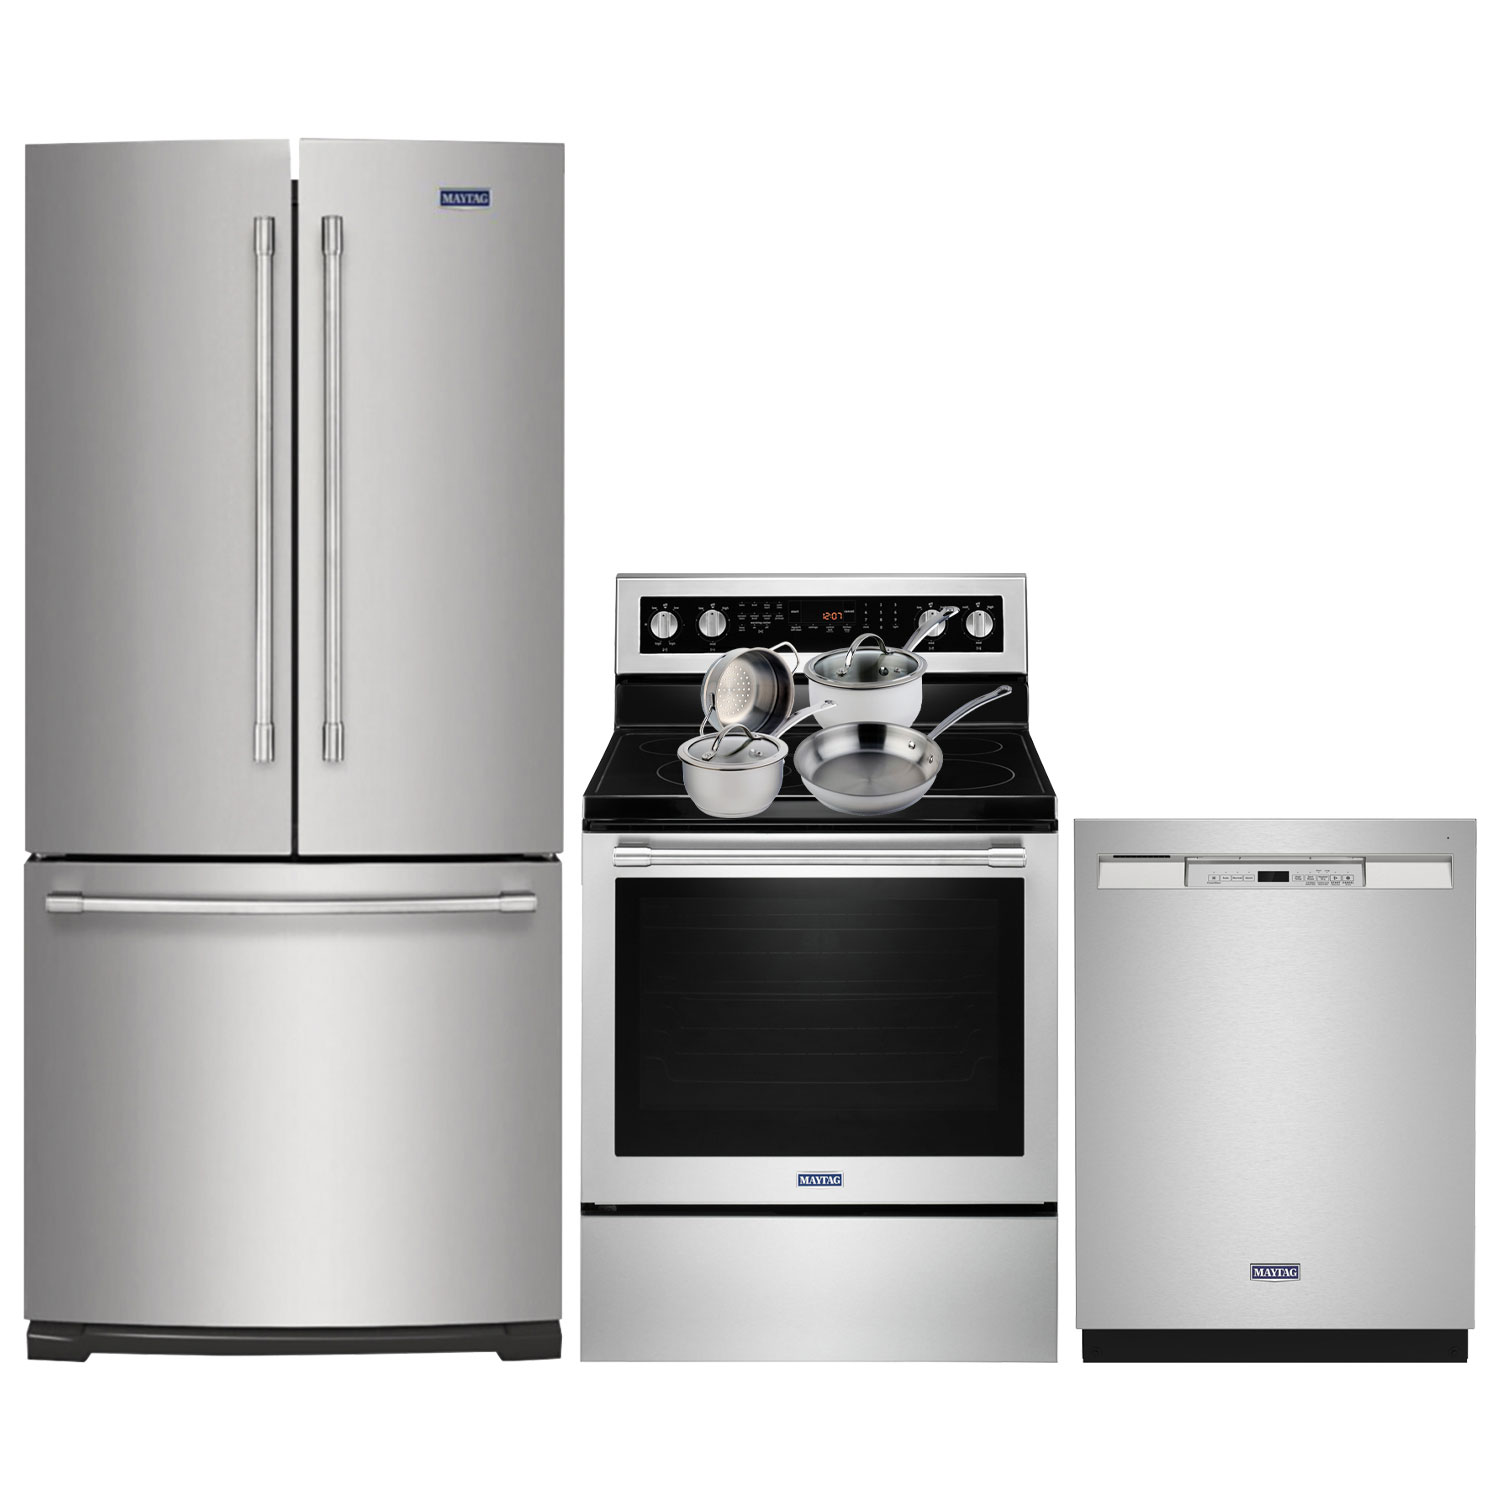 Maytag 30" 20 Cu. Ft. French Door Refrigerator; Electric Range; Dishwasher; Cookware Set - Stainless